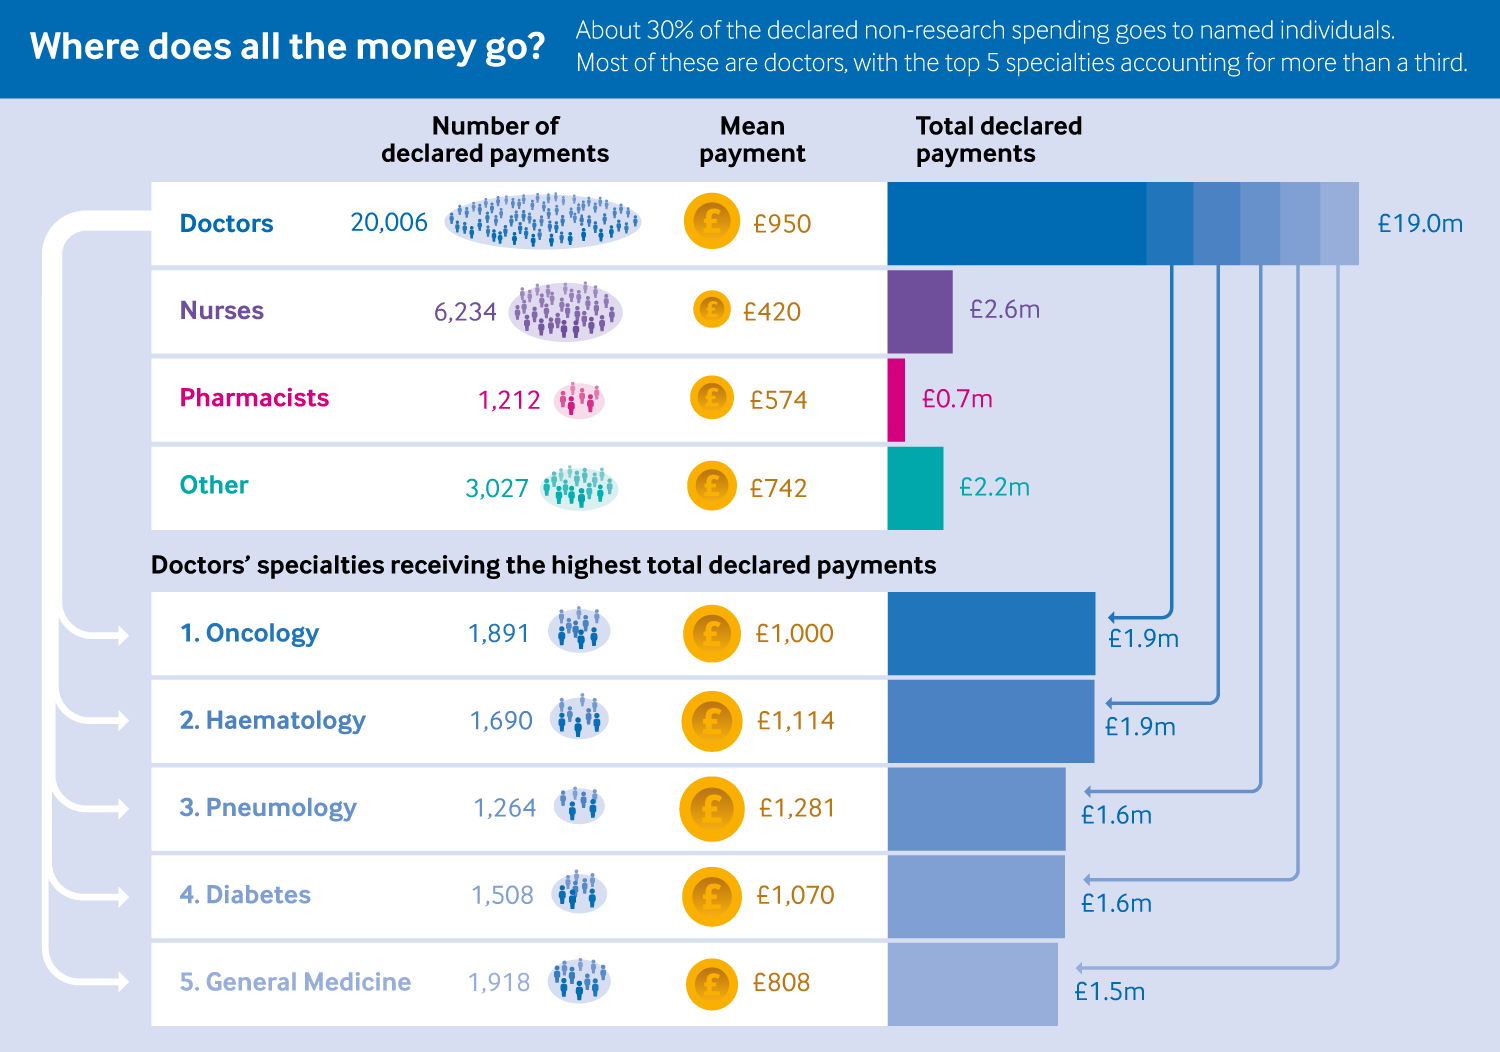 infographic showing that most of the named payments went to doctors (£19.0m of £24.5m), rather than Nurses (£2.6m), Pharmacists (£0.7m) and others (£2.2m). The top five specialties (Oncology, Haematology, Pneumology, Diabetes and General Medicine) received more than a third of this total.